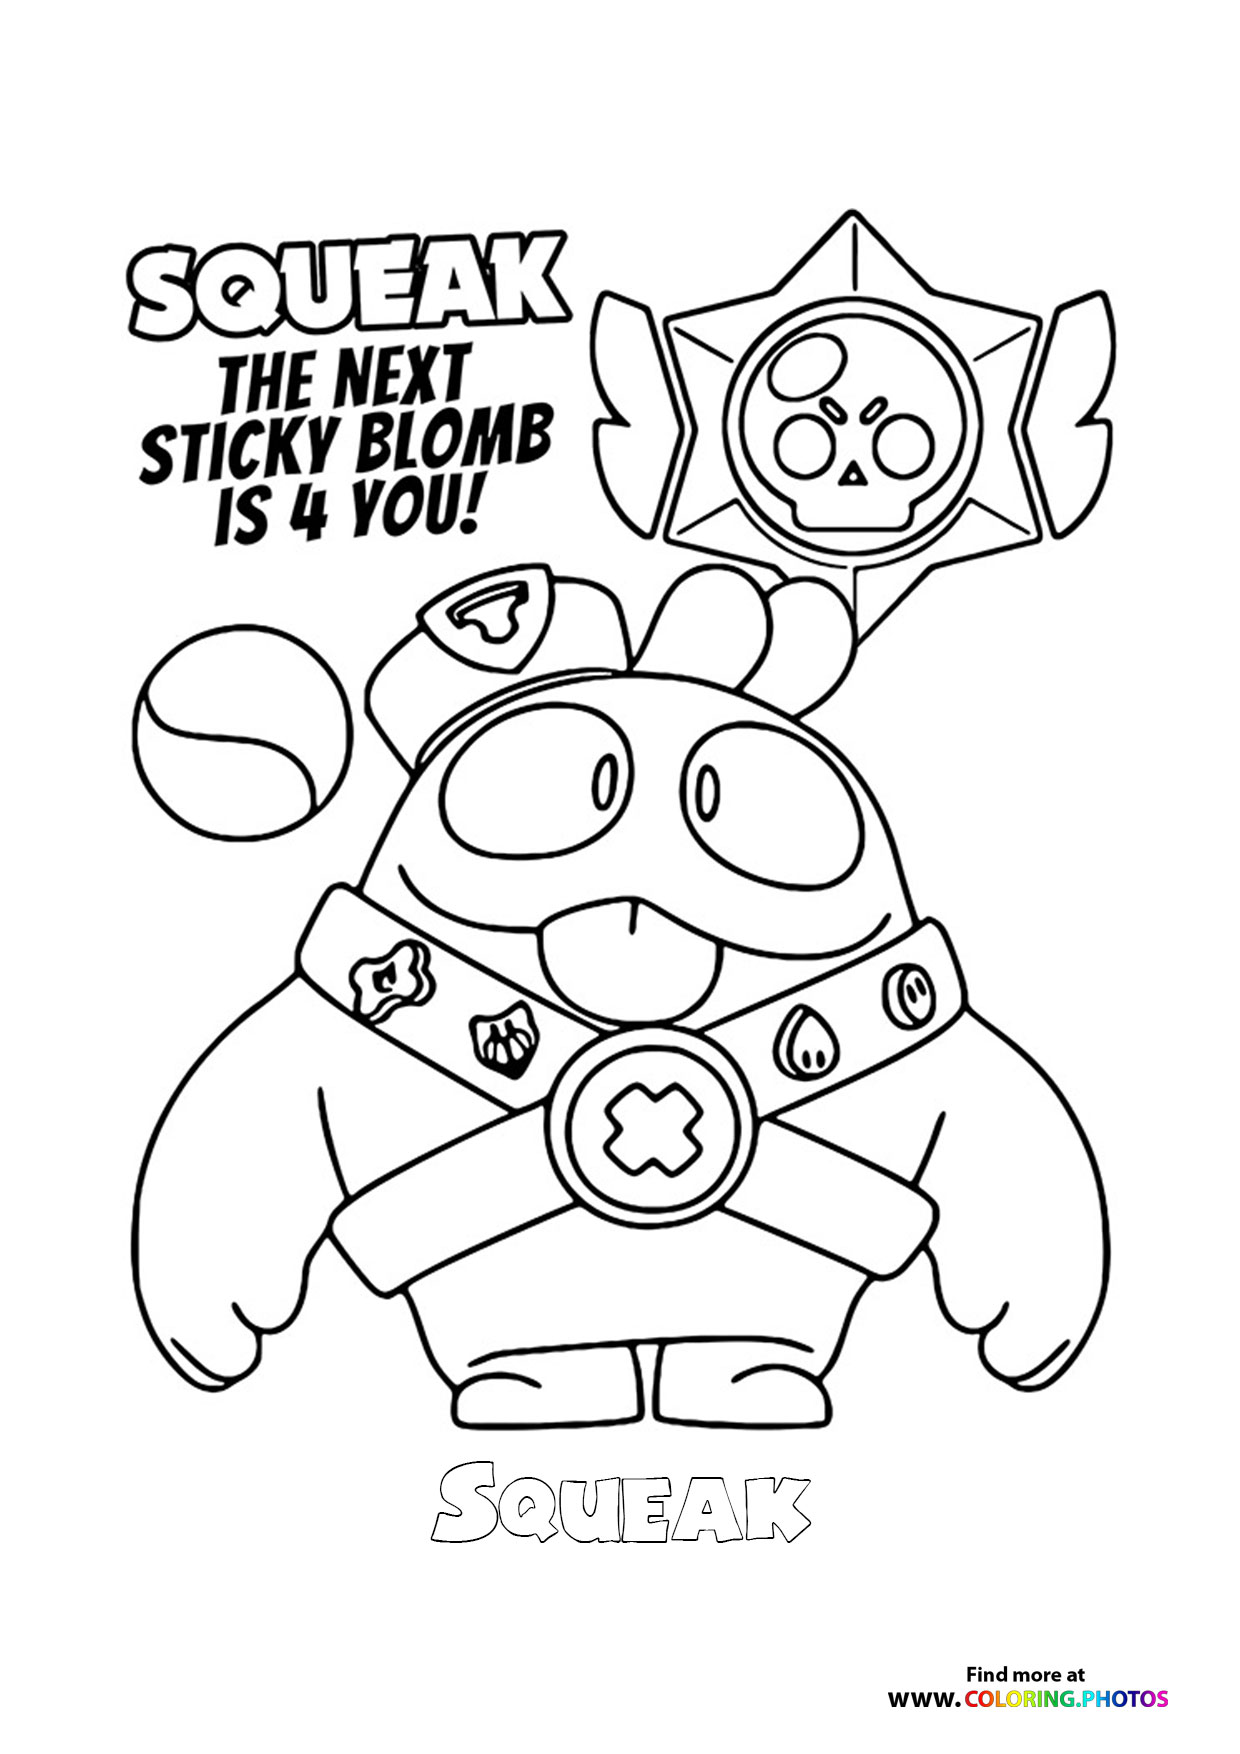 Games - Page 10 of 10 - Coloring Pages for kids | Free and easy print ...